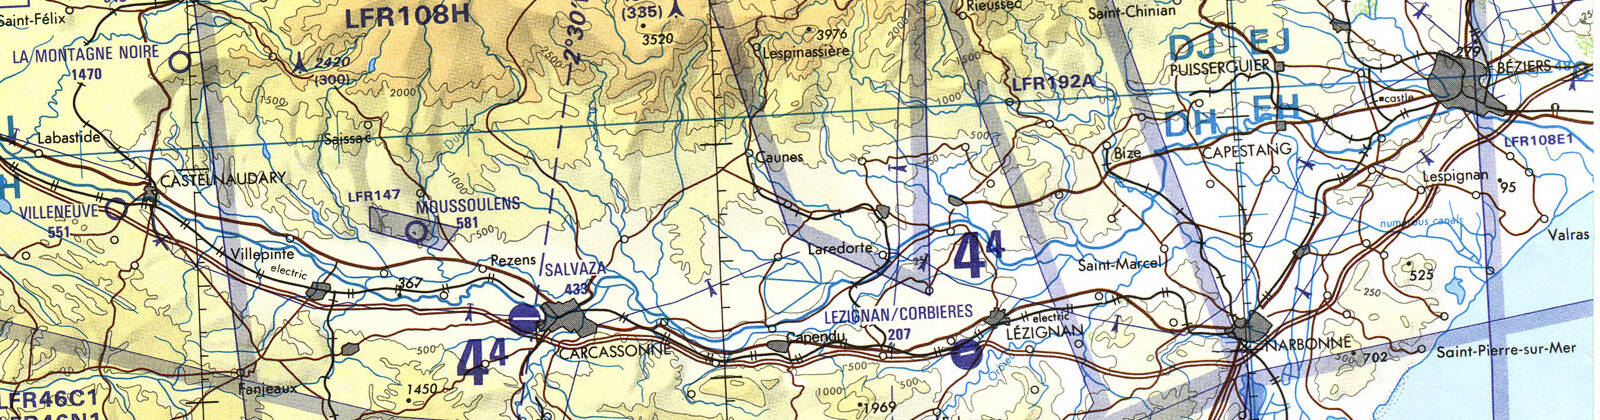 TPC F-1C map from Perry Castañeda Library Map Collection at the University of Texas, http://lib.utexas.edu/maps/